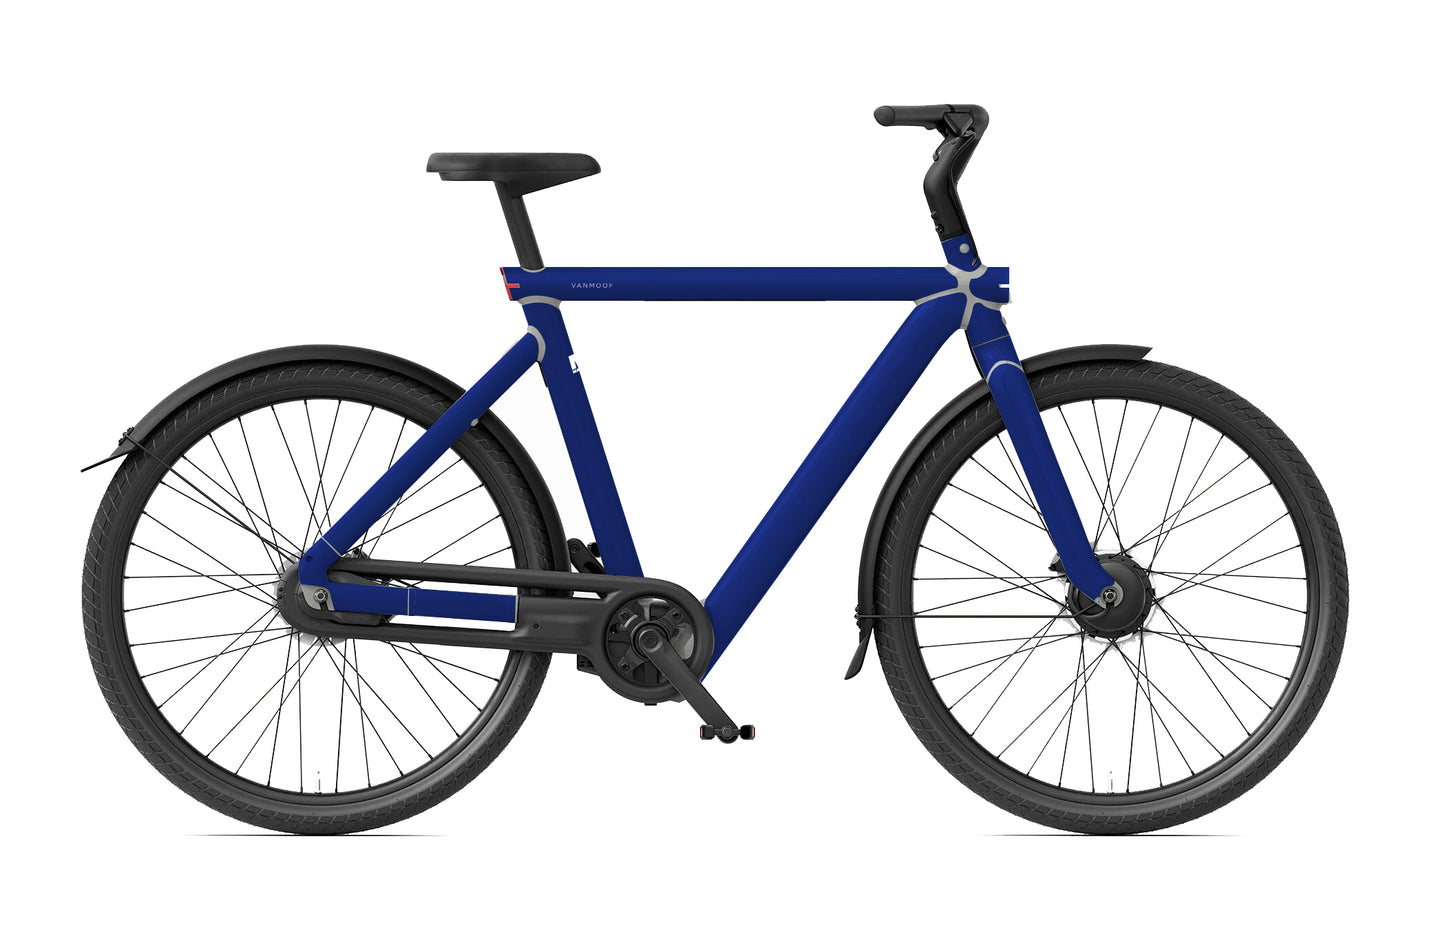 NAVY BLUE PROTECT KIT FOR VANMOOF S5